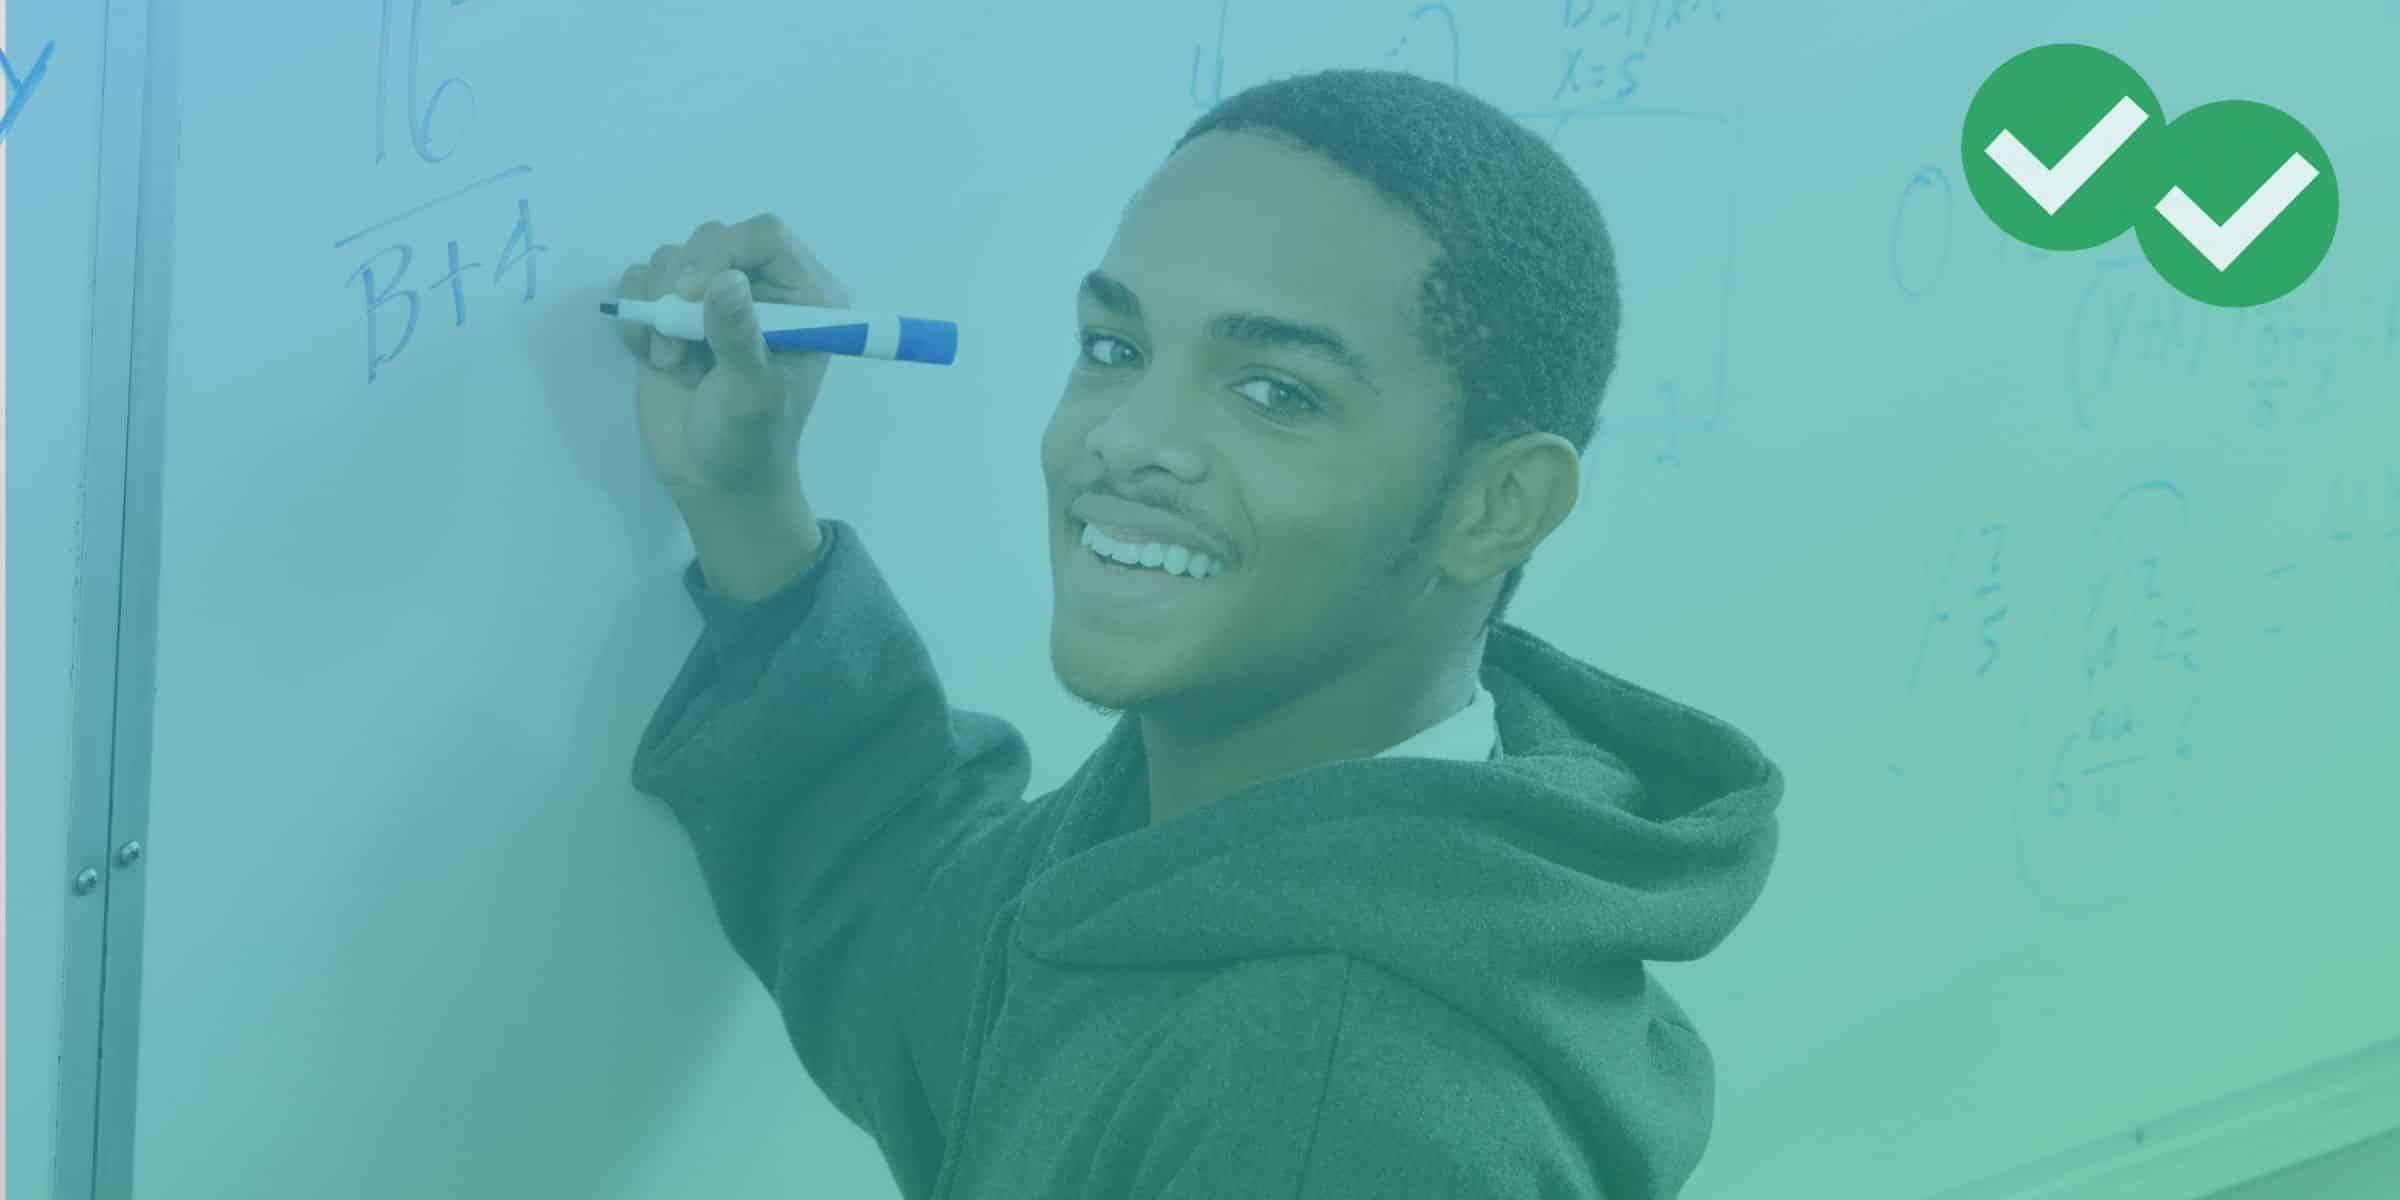 student writing complex math problem on whiteboard while smiling at camera